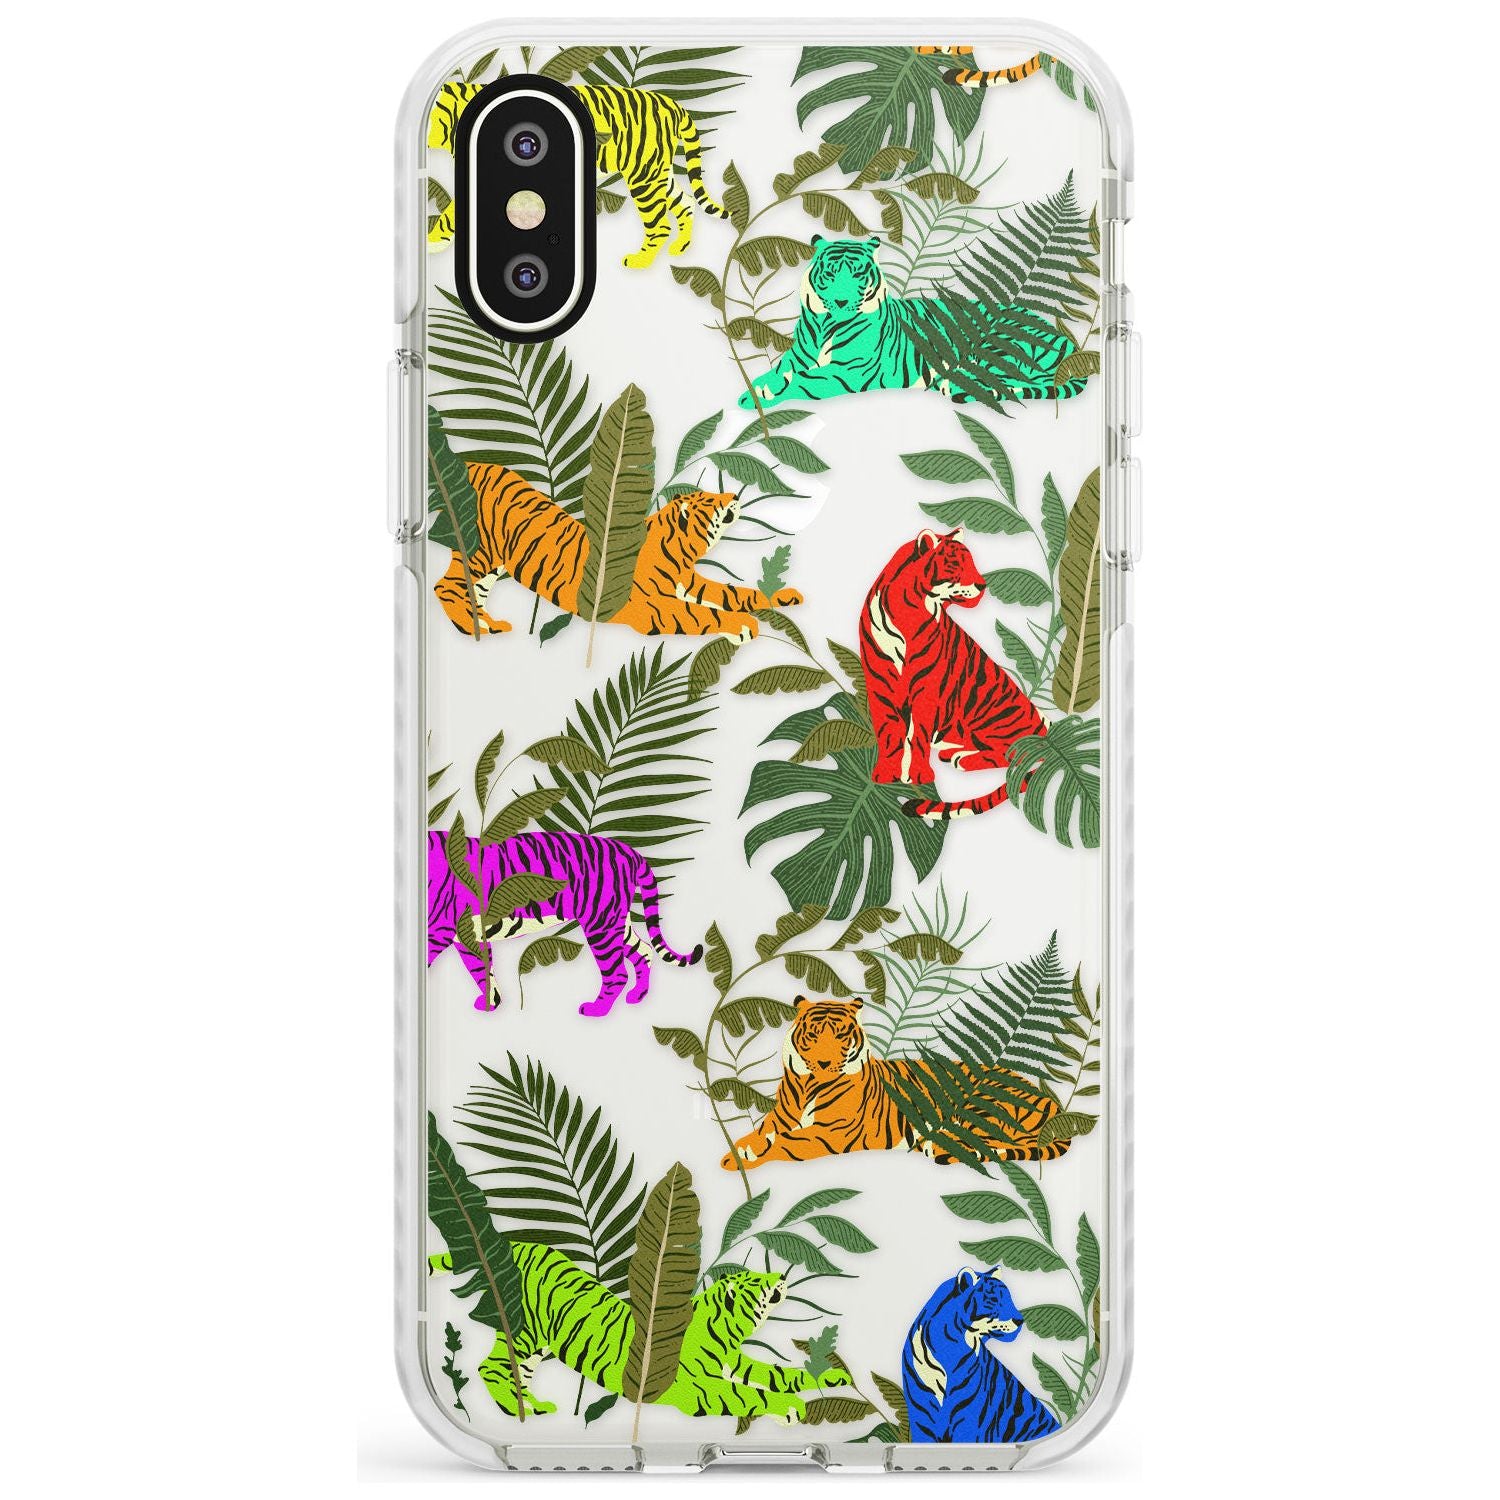 Colourful Tiger Jungle Cat Pattern Impact Phone Case for iPhone X XS Max XR